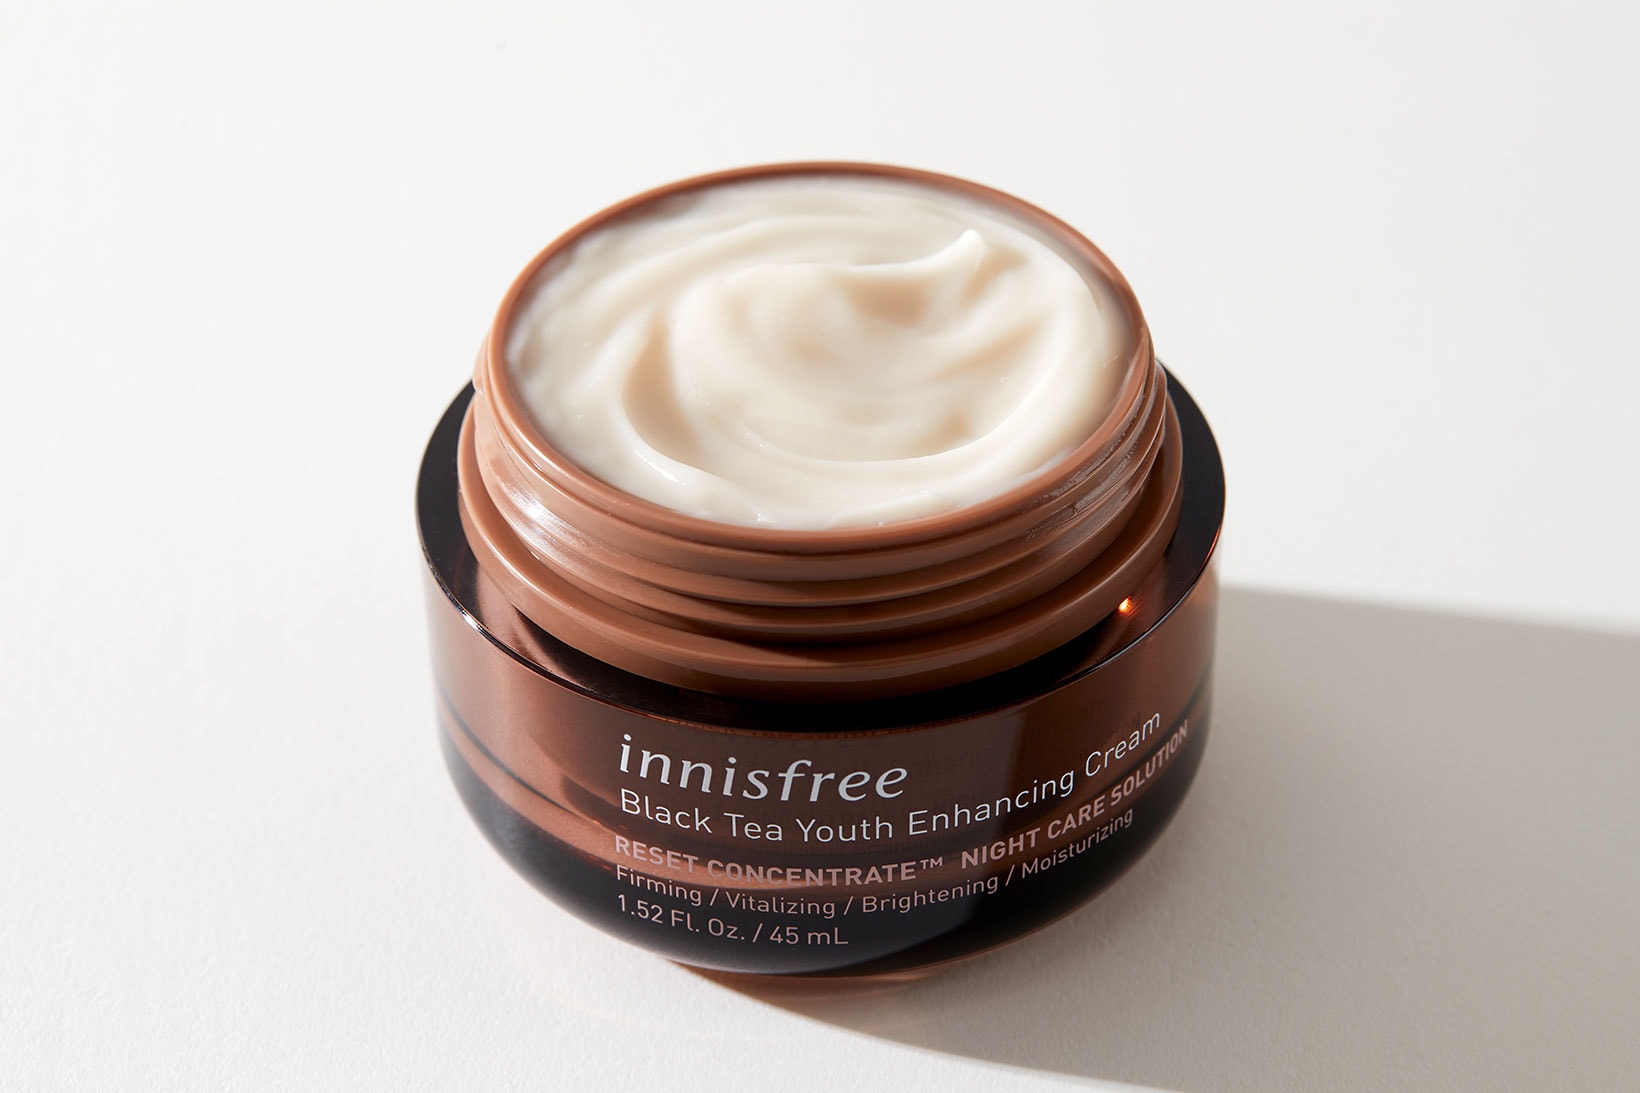 innisfree black tea youth enhancing line products collection k-beauty skincare face cream